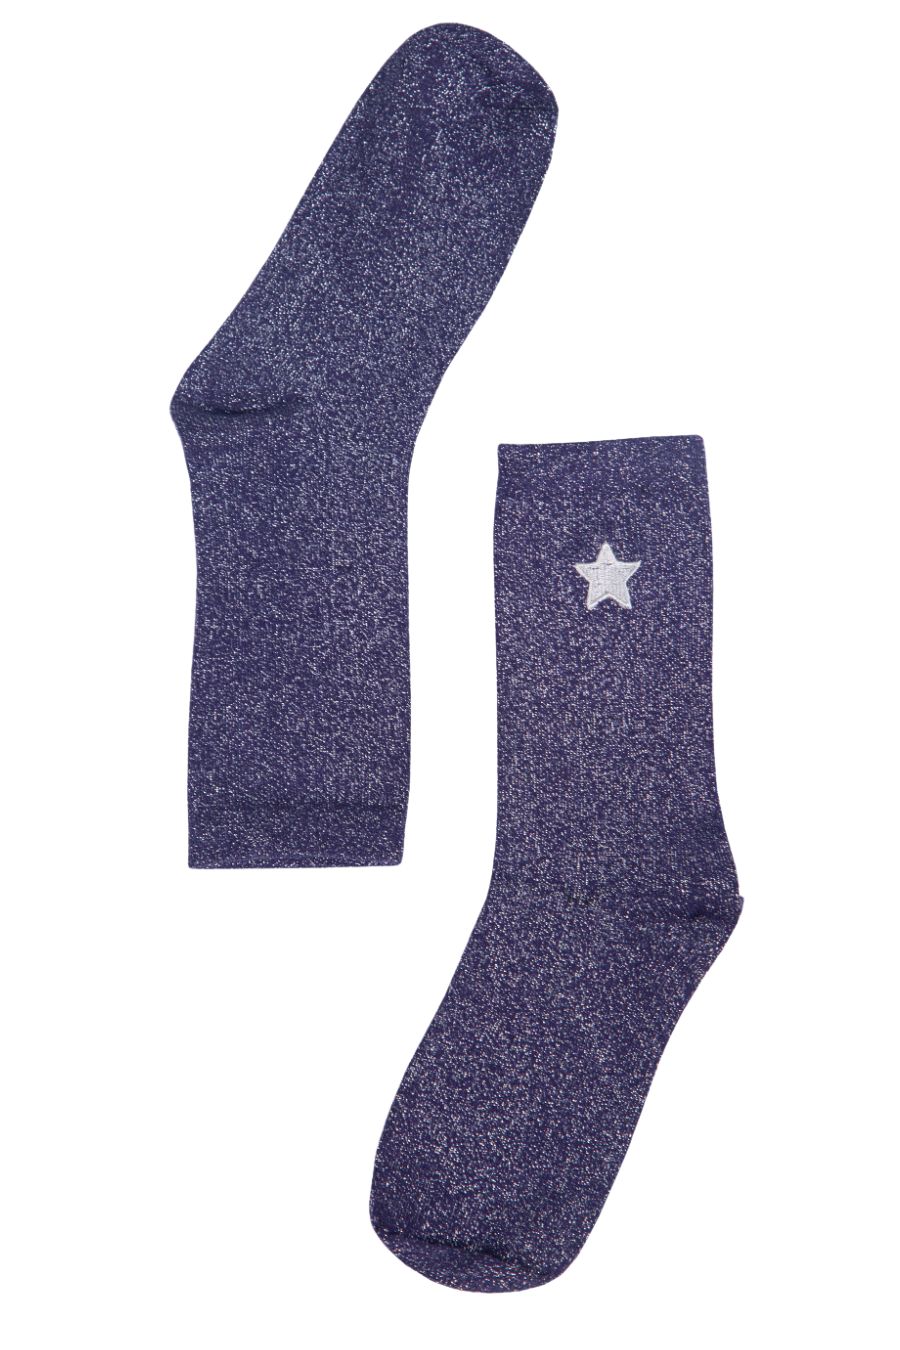 navy blue, silver glitter socks with silver embroidered star